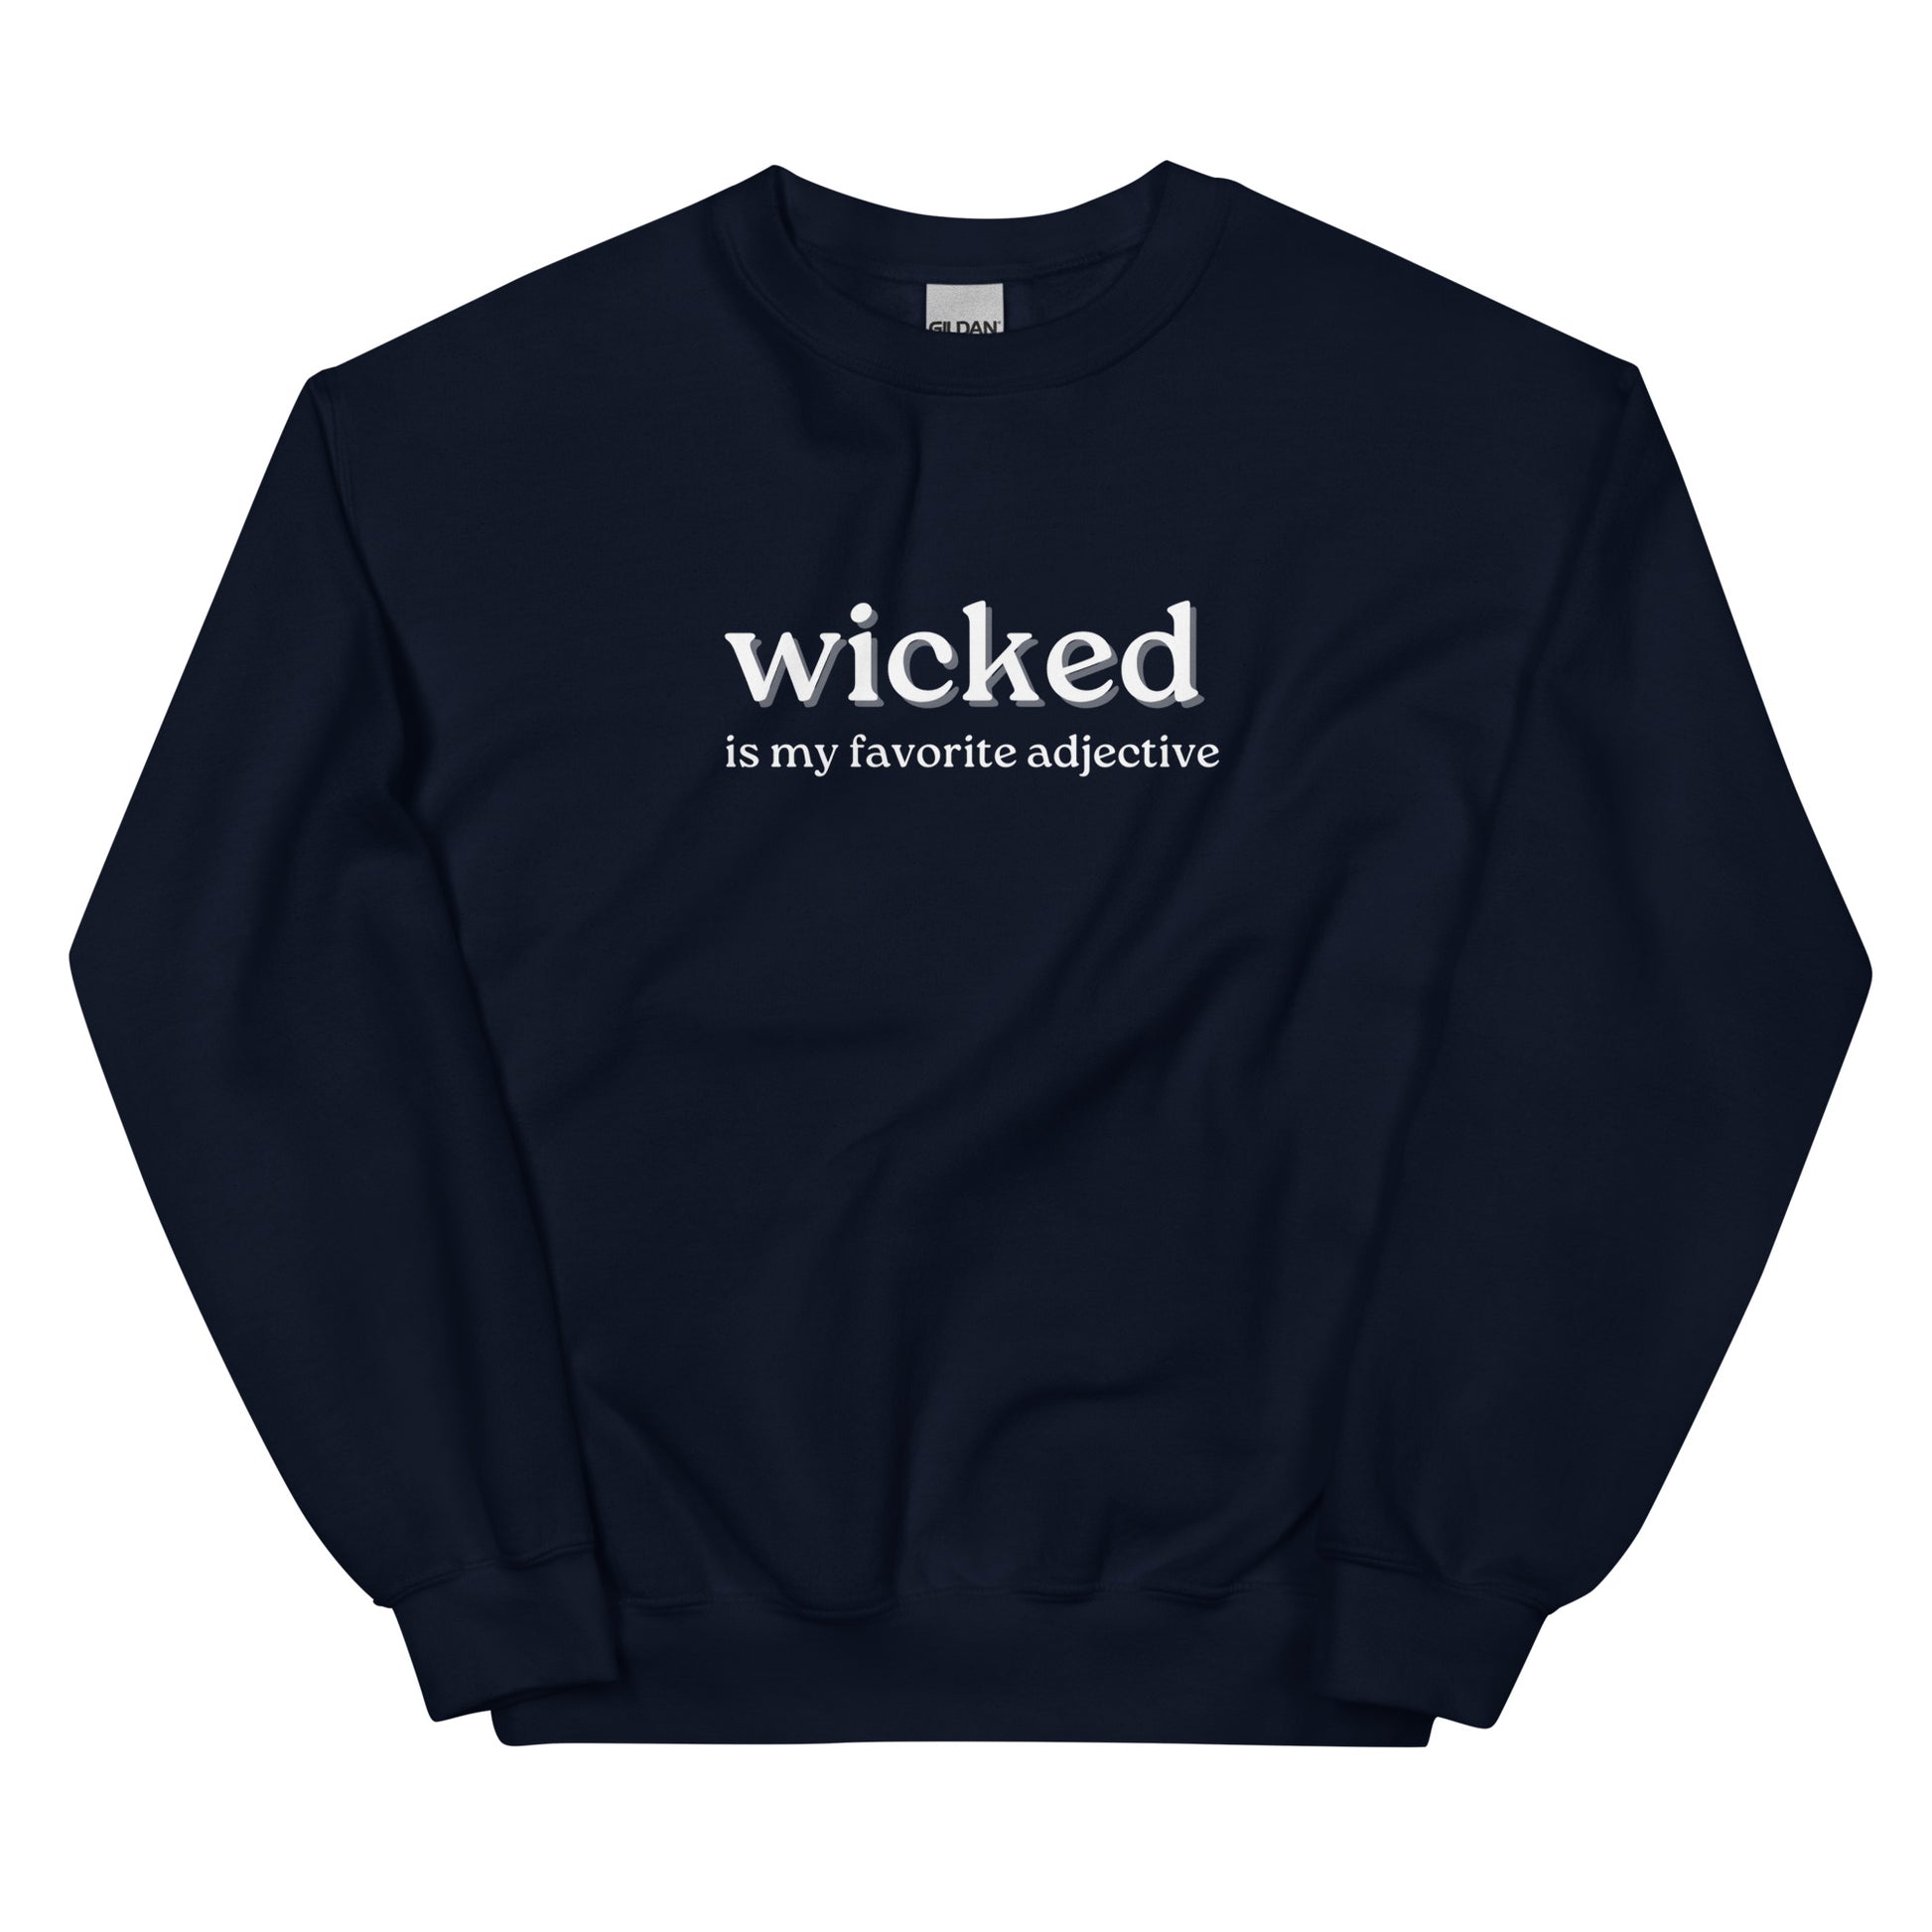 navy crewneck that says "wicked is my favorite adjective" in white lettering